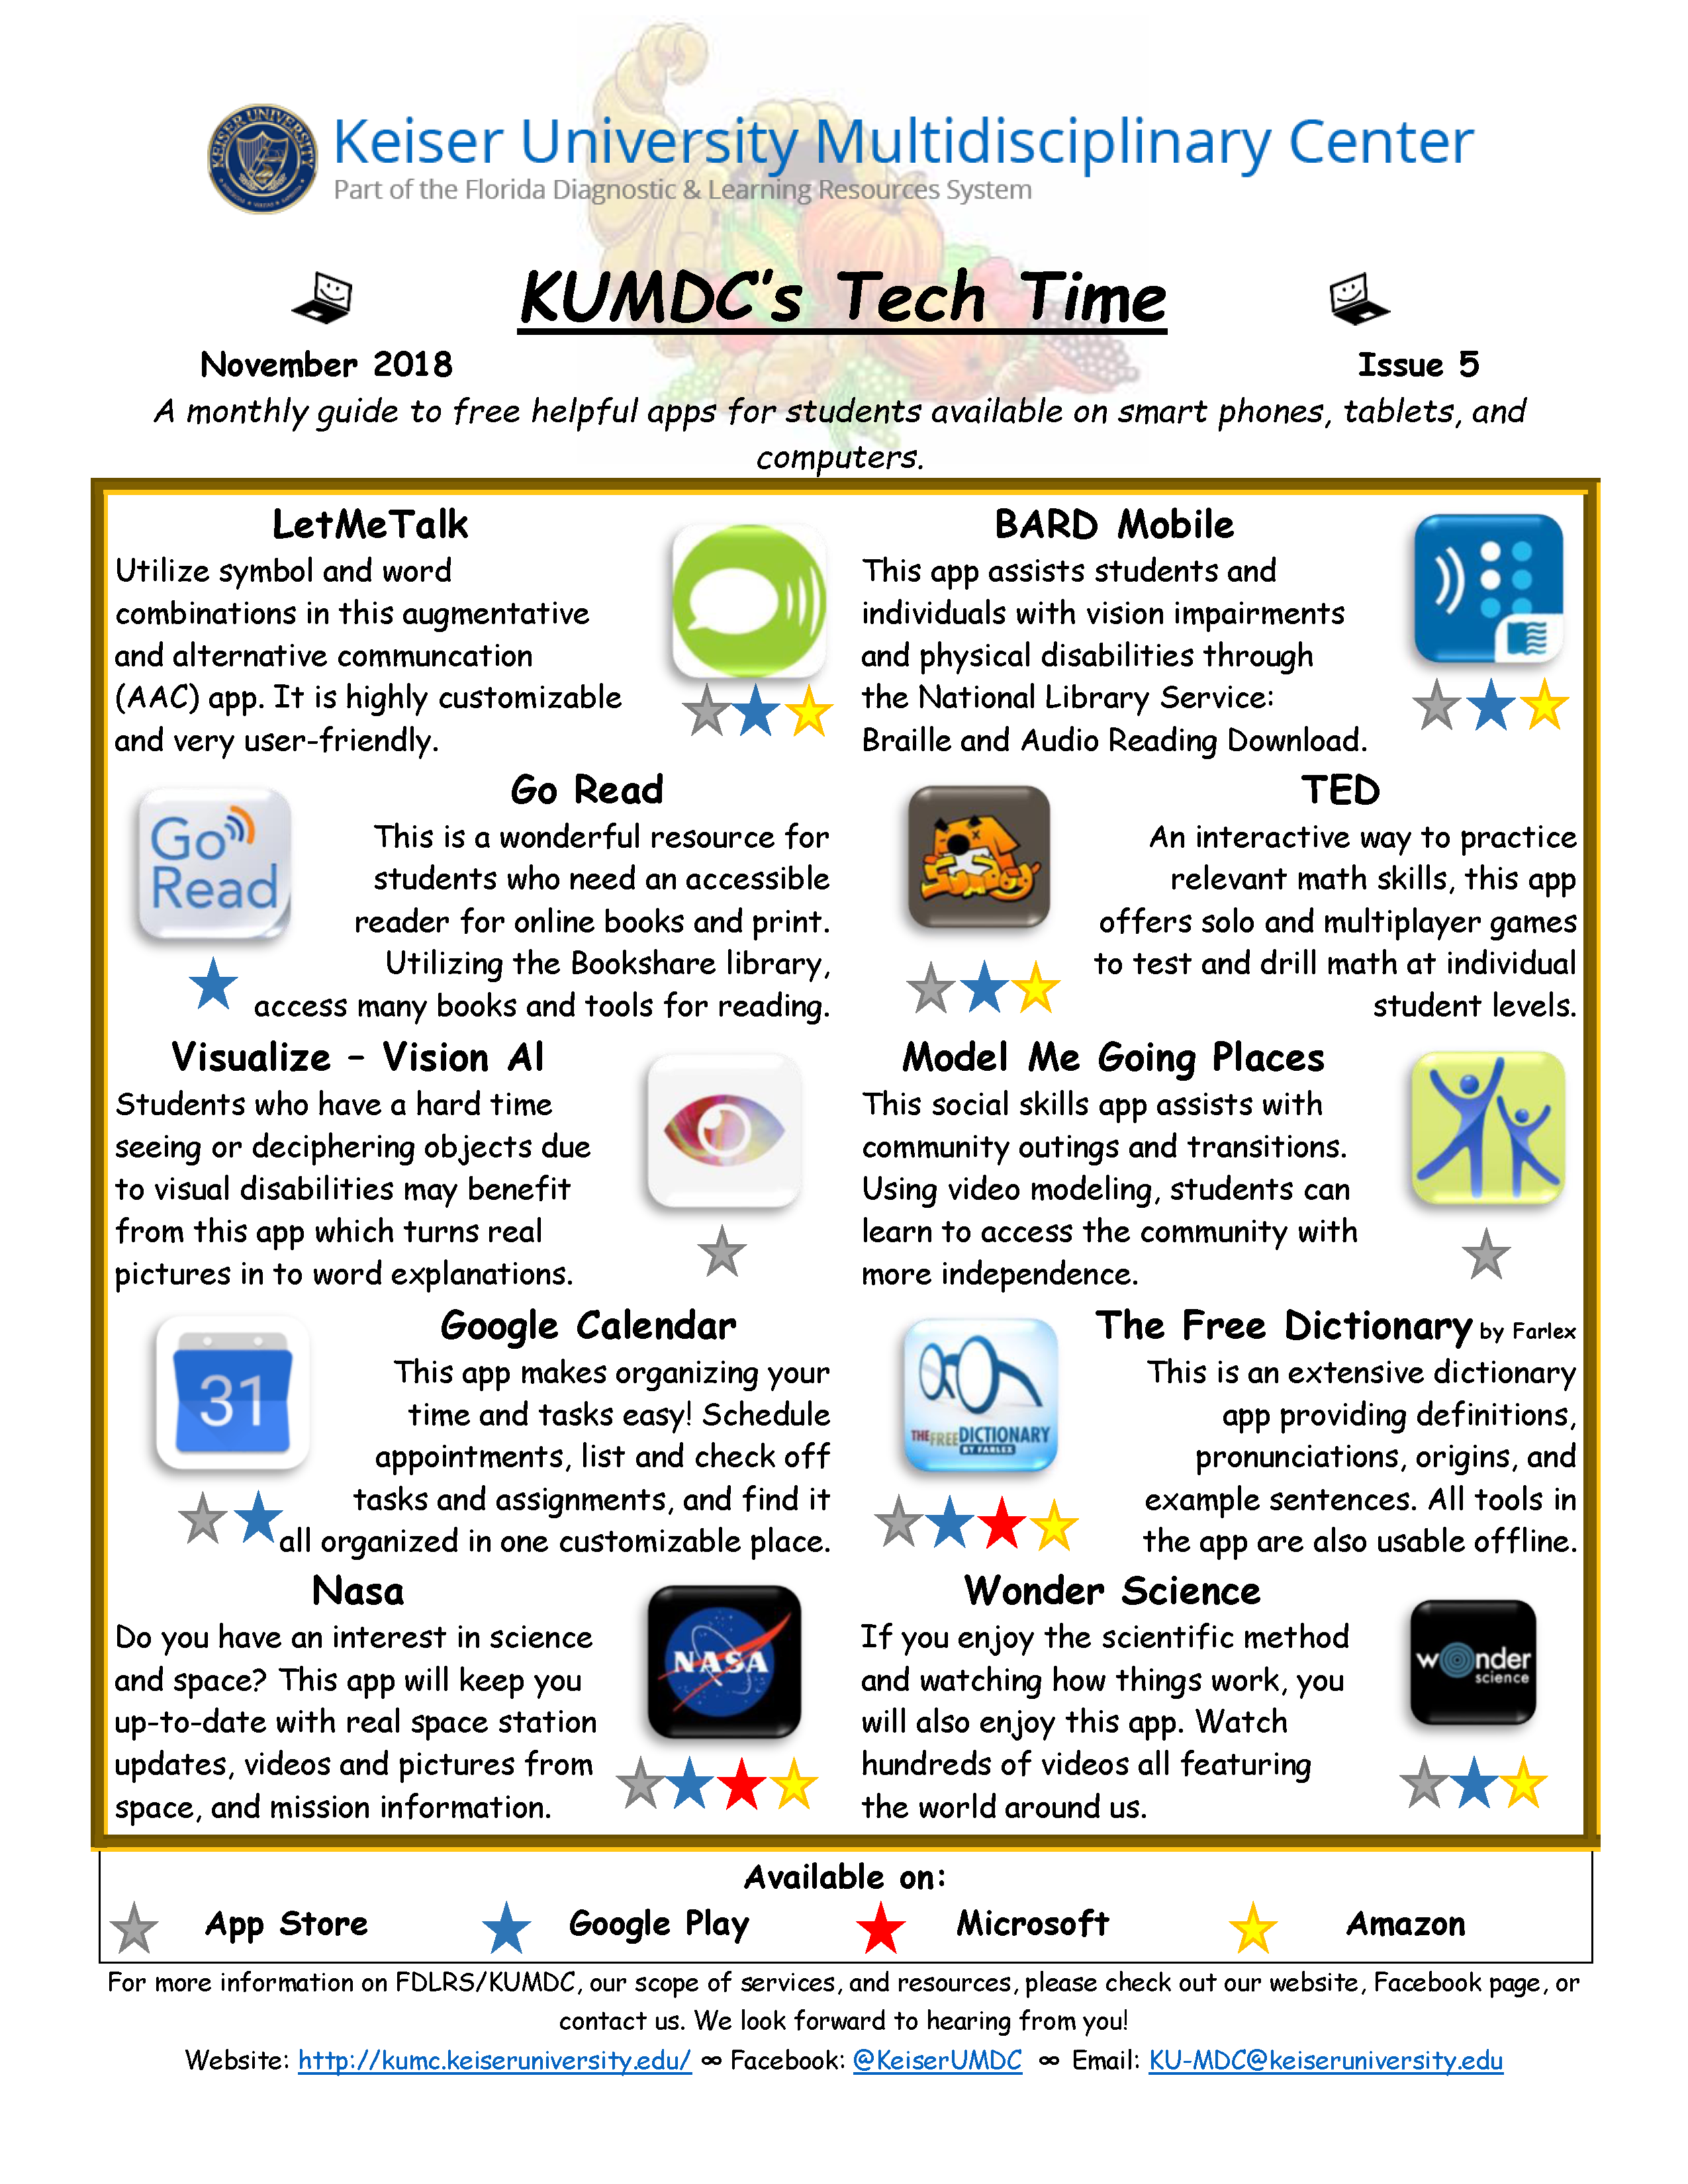 image with clickable link to November 2018 TechTime Newsletter